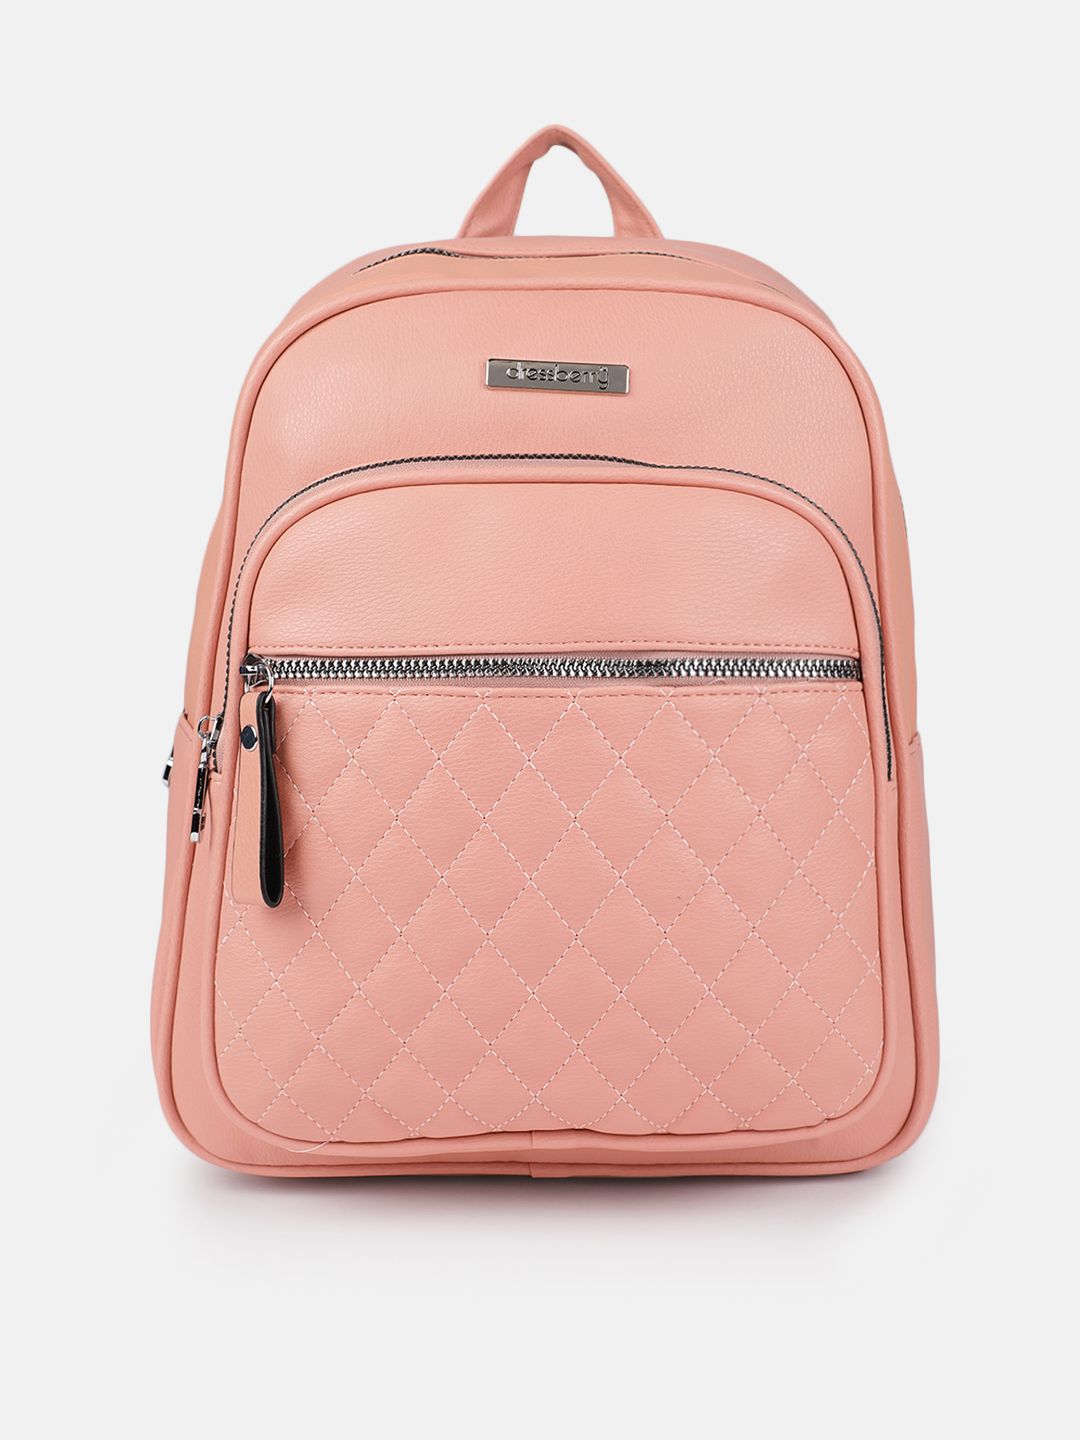 DressBerry Women Pink Solid Backpack Price in India